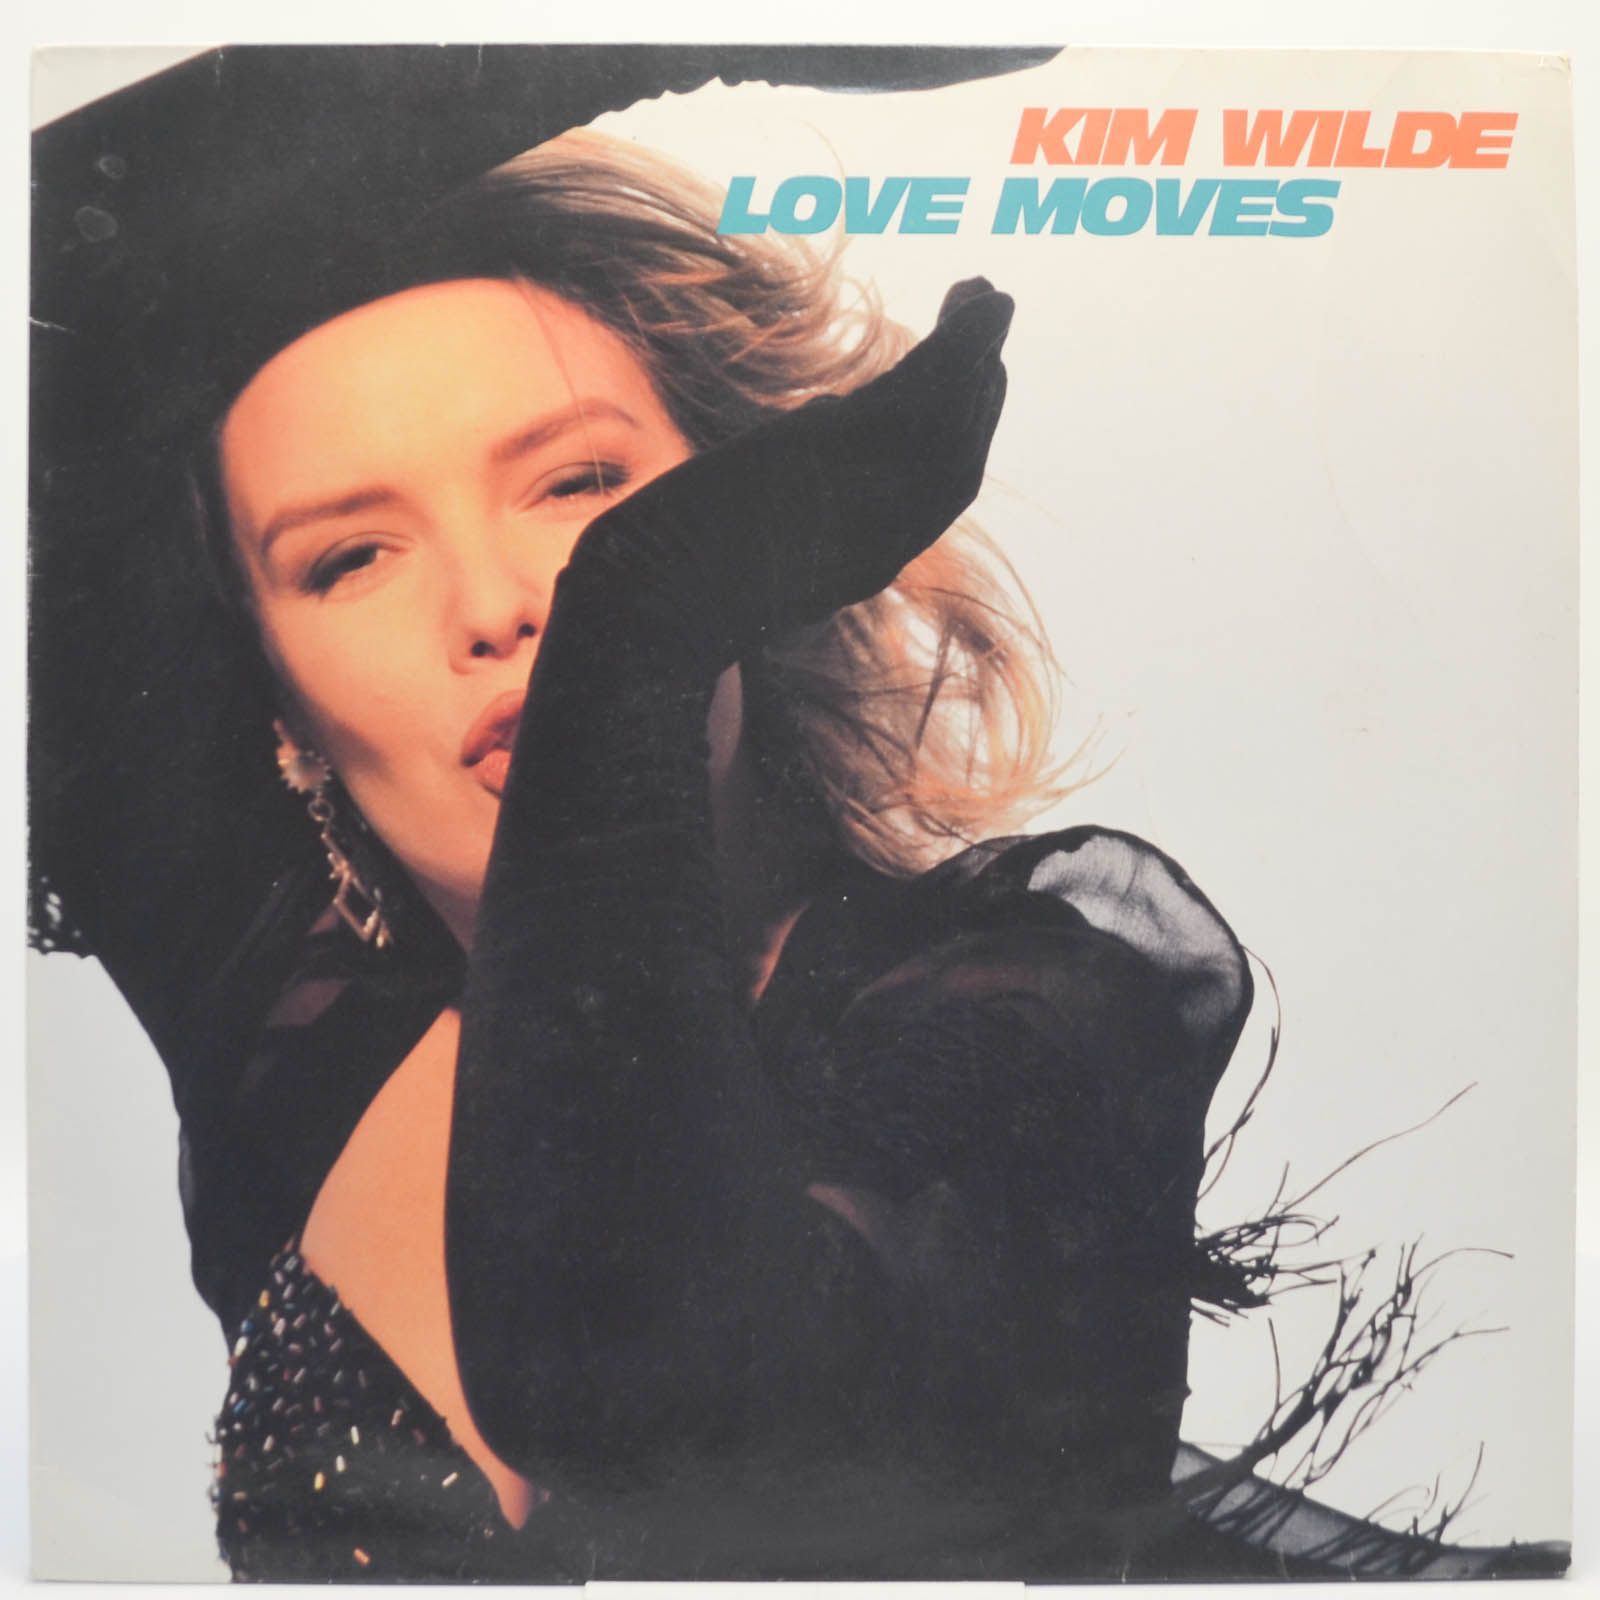 Love Moves, 1990